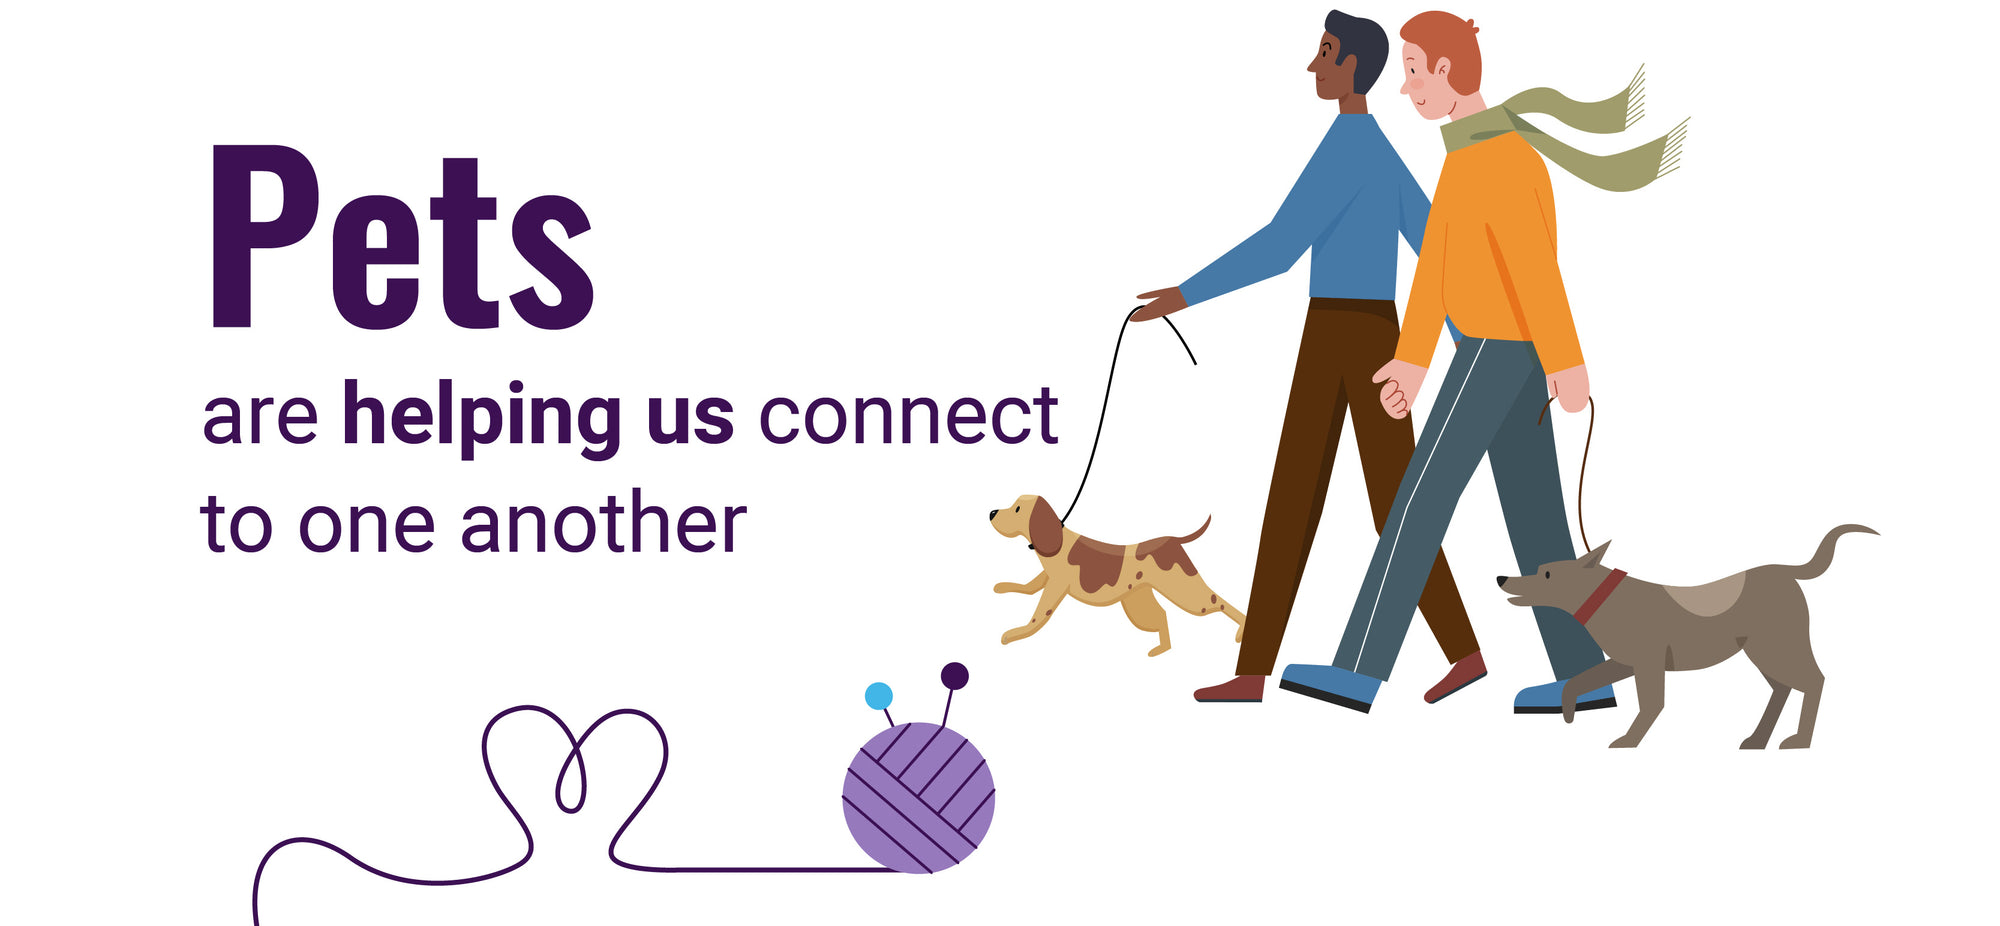 Pets help us connect to one another